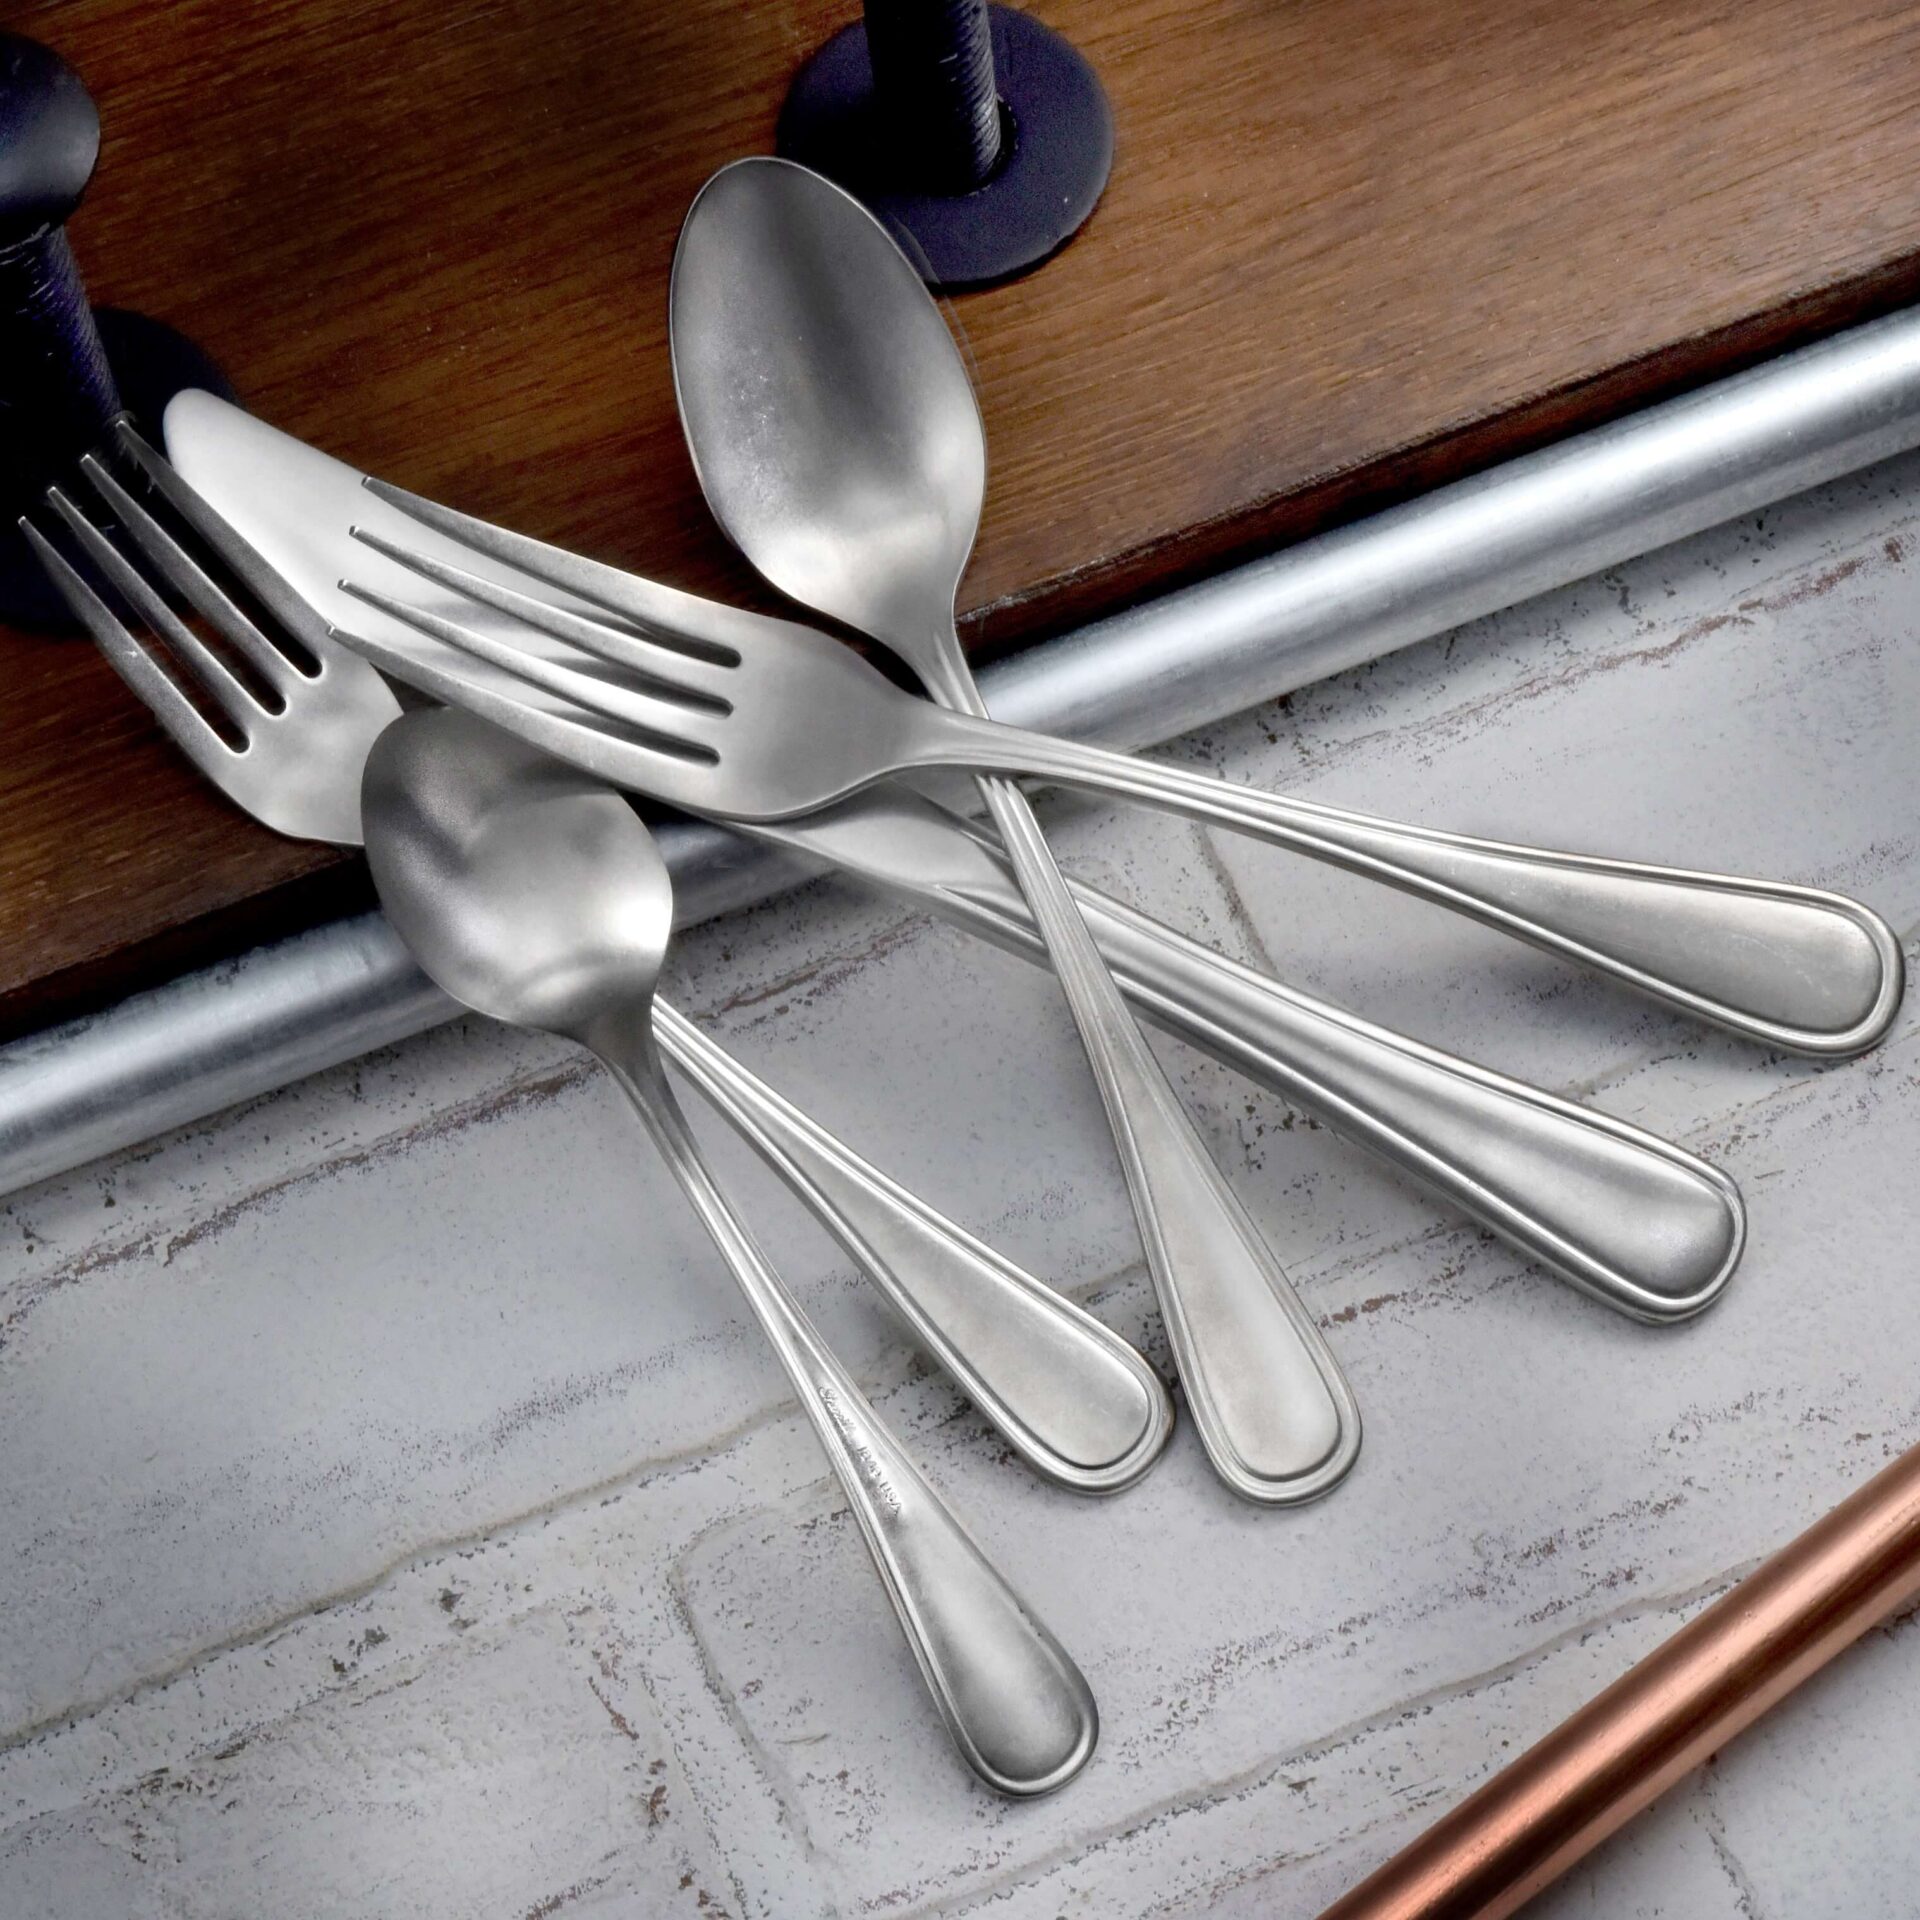 Industrial Rim Spoons and Fork Set on a Surface